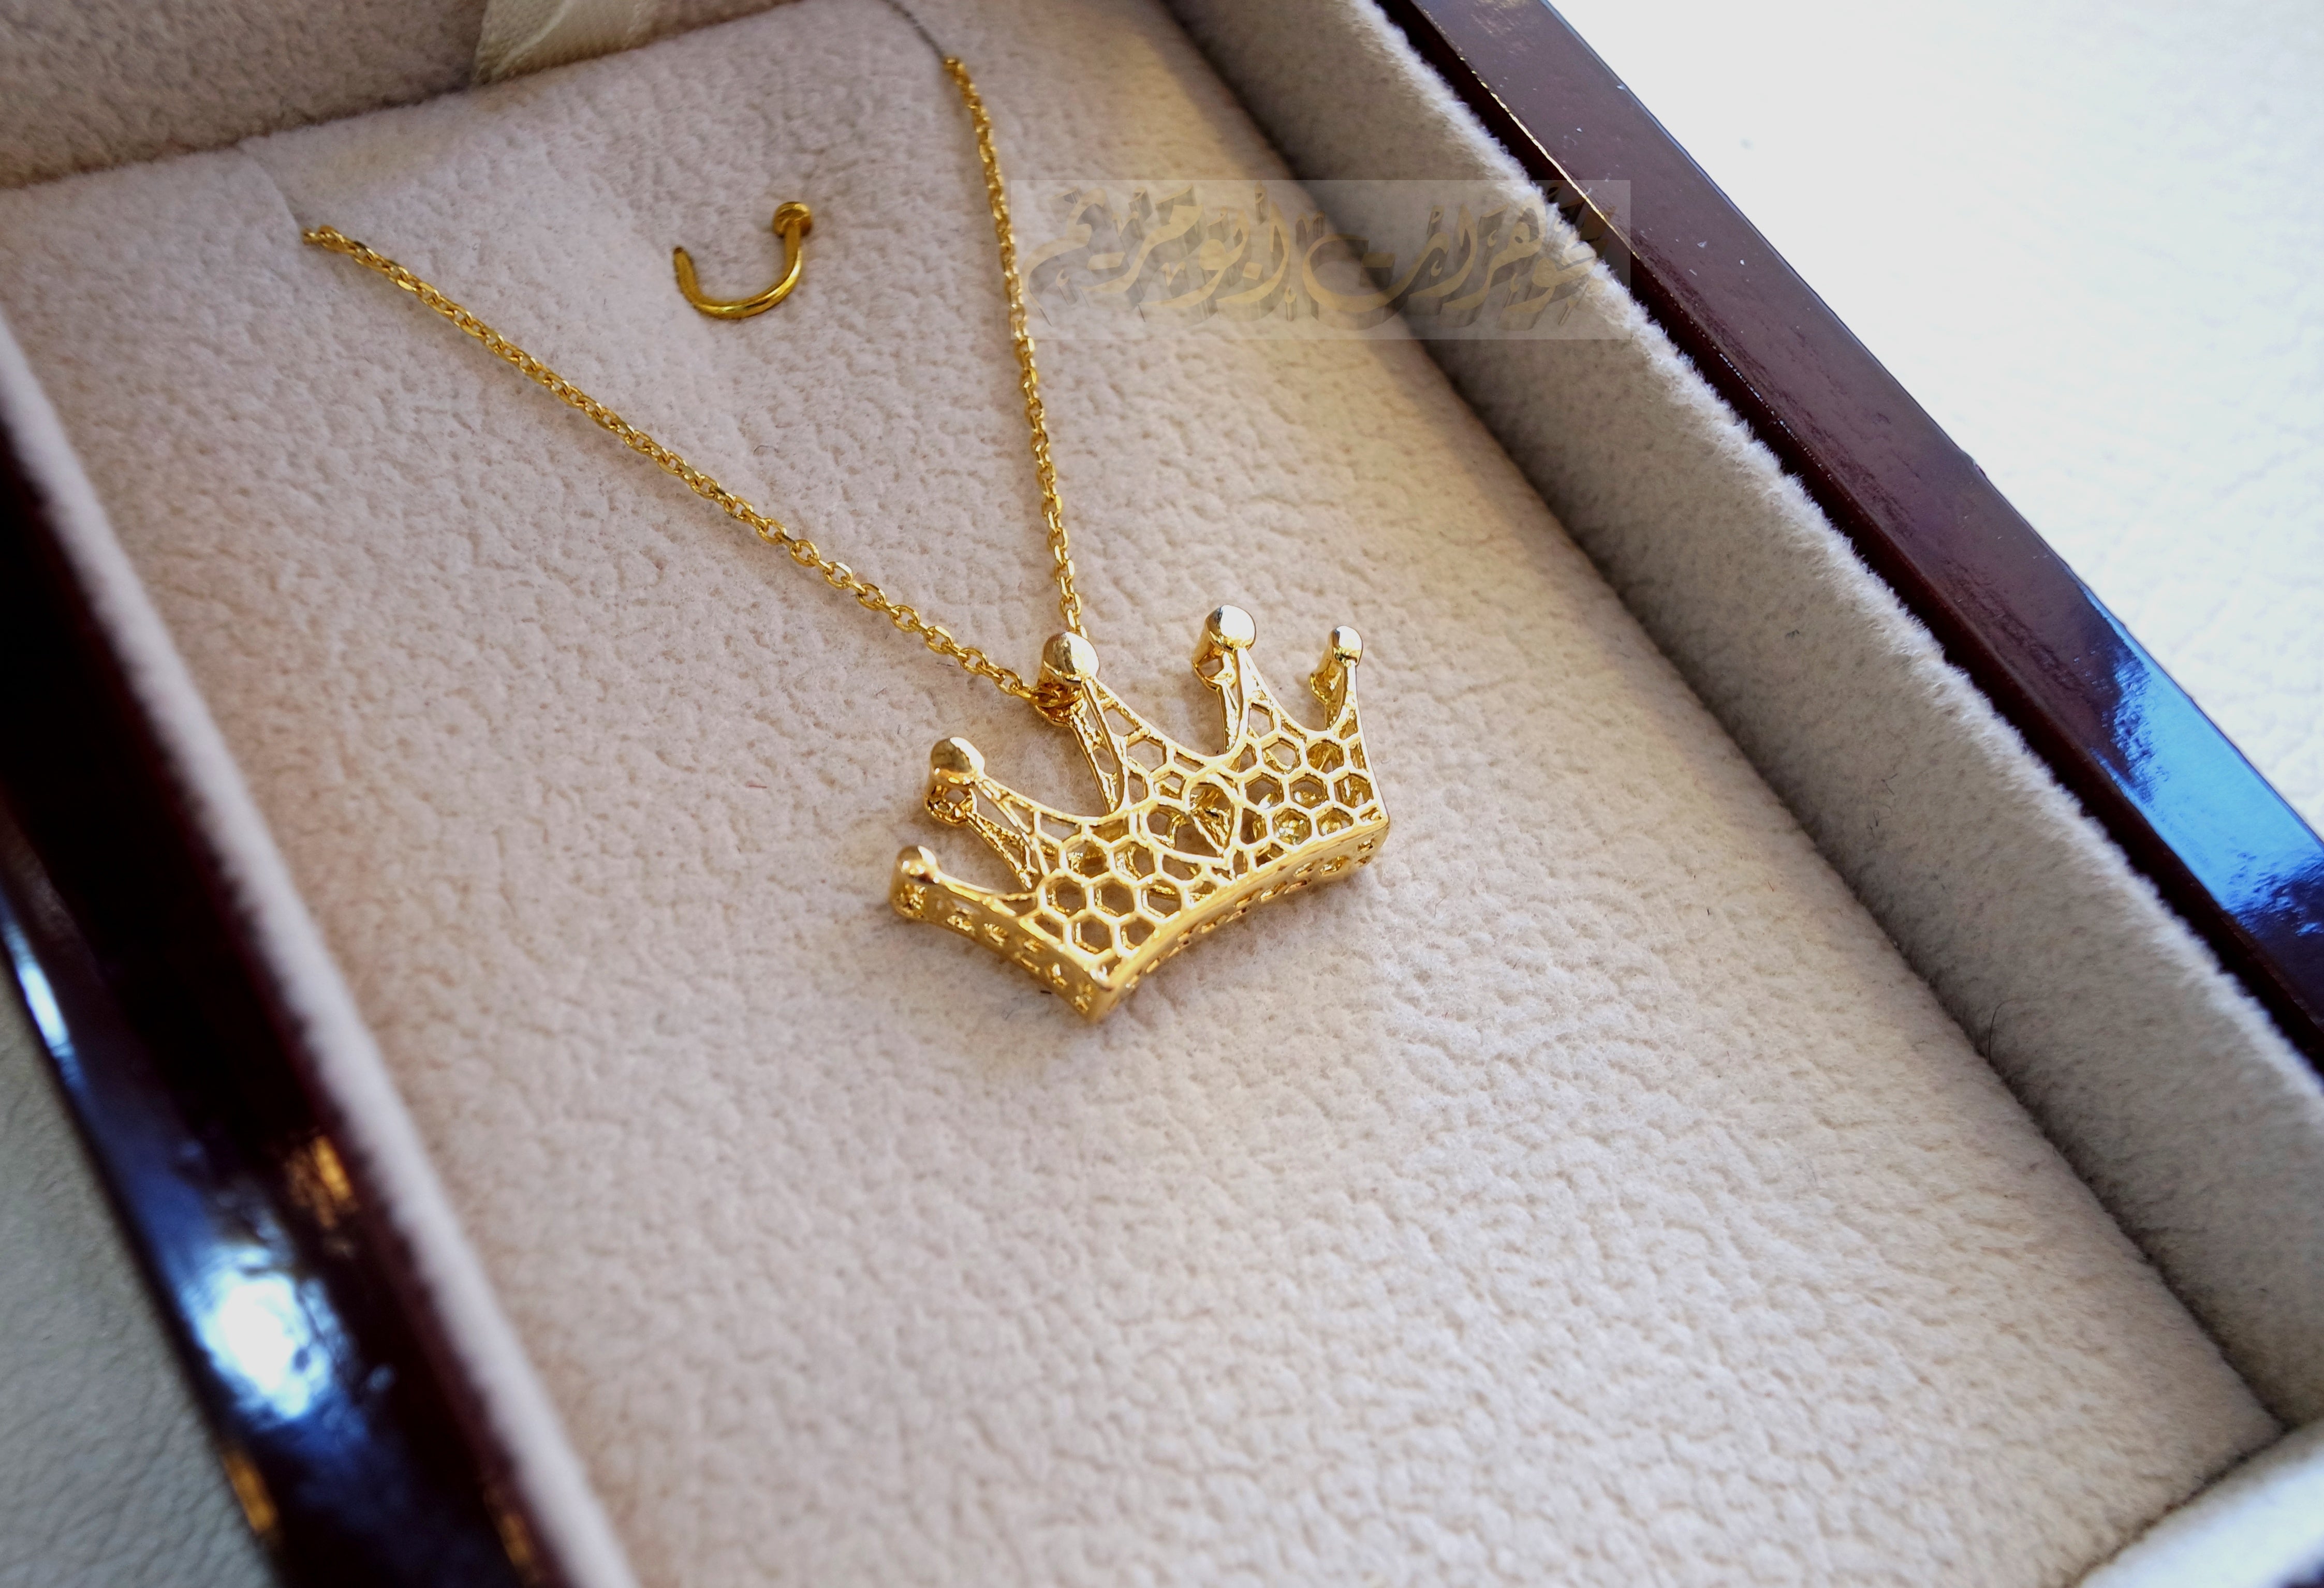 Honeycomb Cinderlla crown 3d 18K yellow gold necklace pendant and chain gift fine jewelry full insured shipping